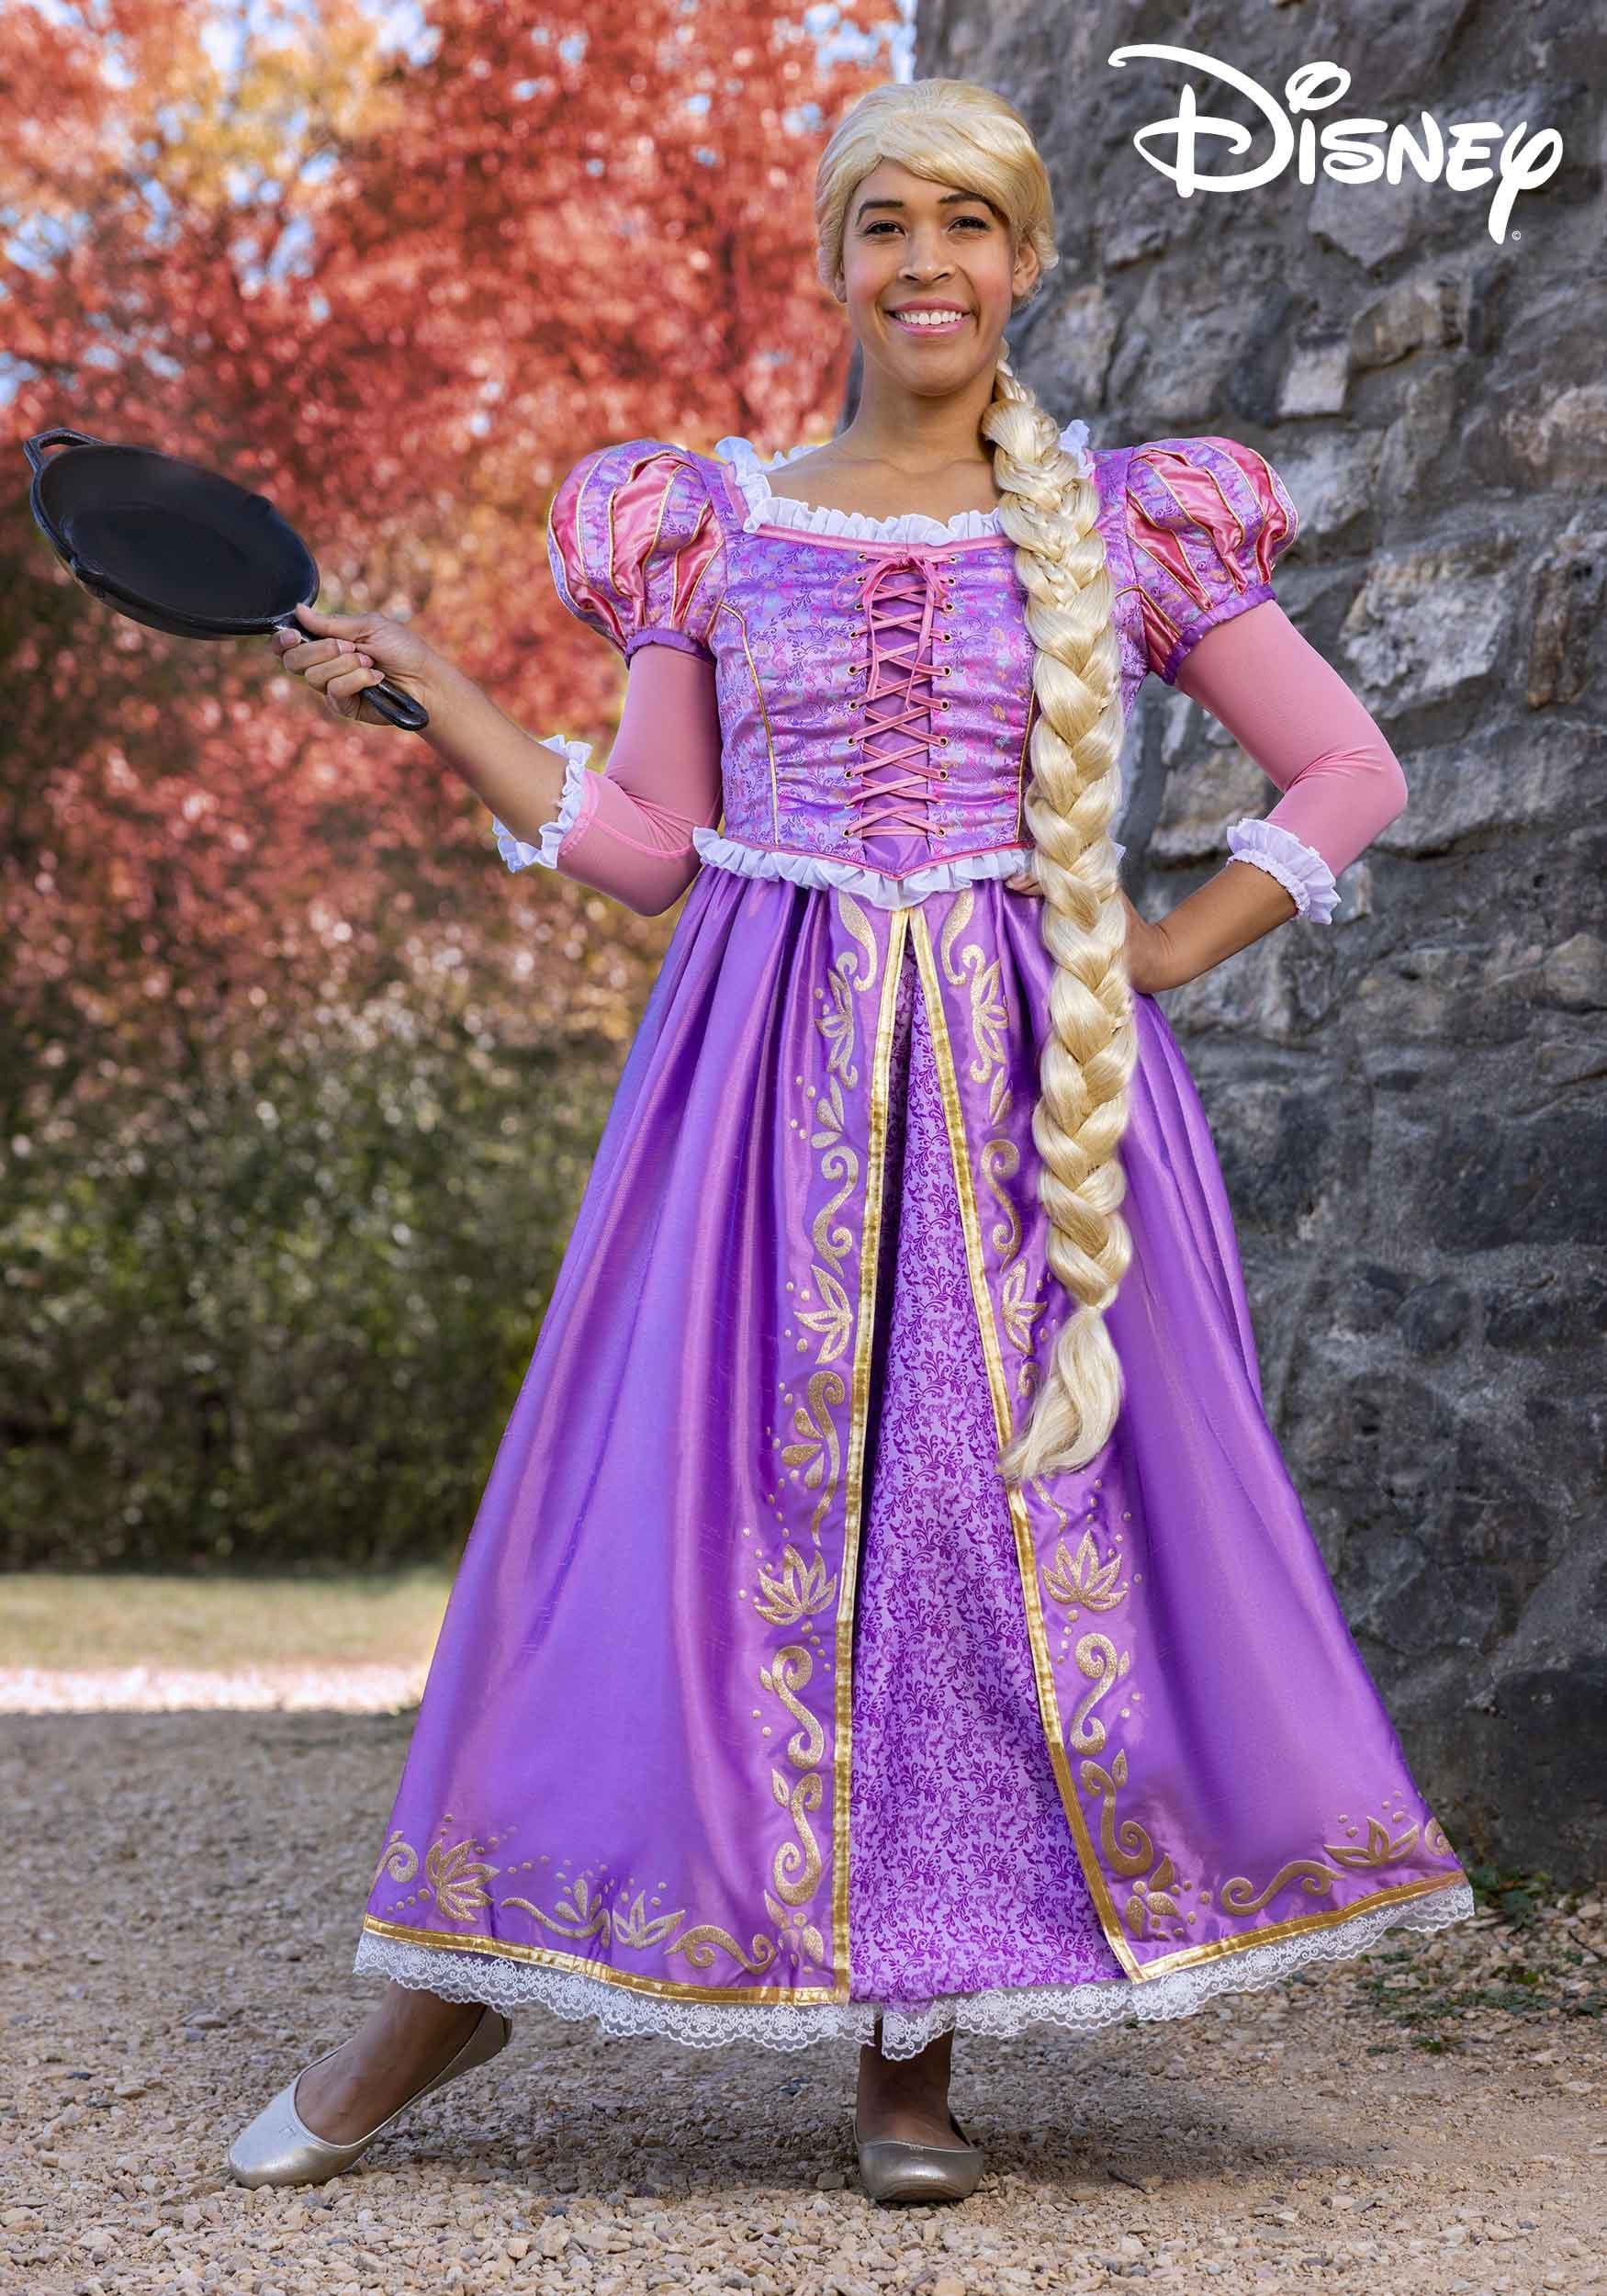 brandie conrad recommends pictures of rapunzel pic